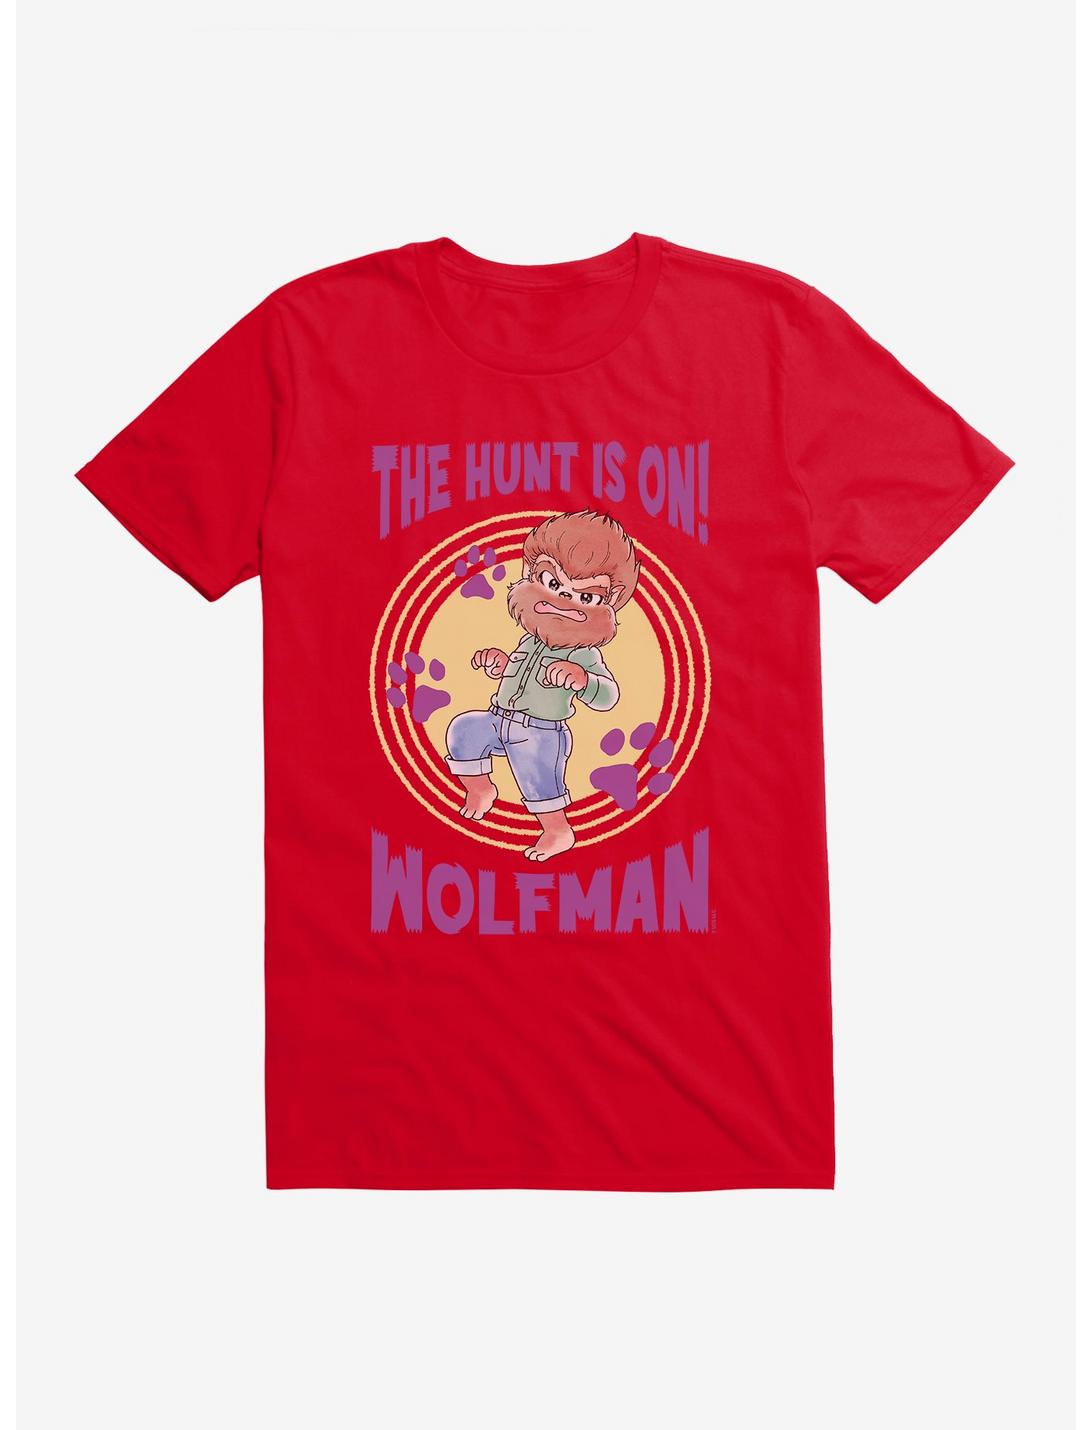 Universal Anime Monsters Hunt Is On Wolfman T-Shirt, RED, hi-res